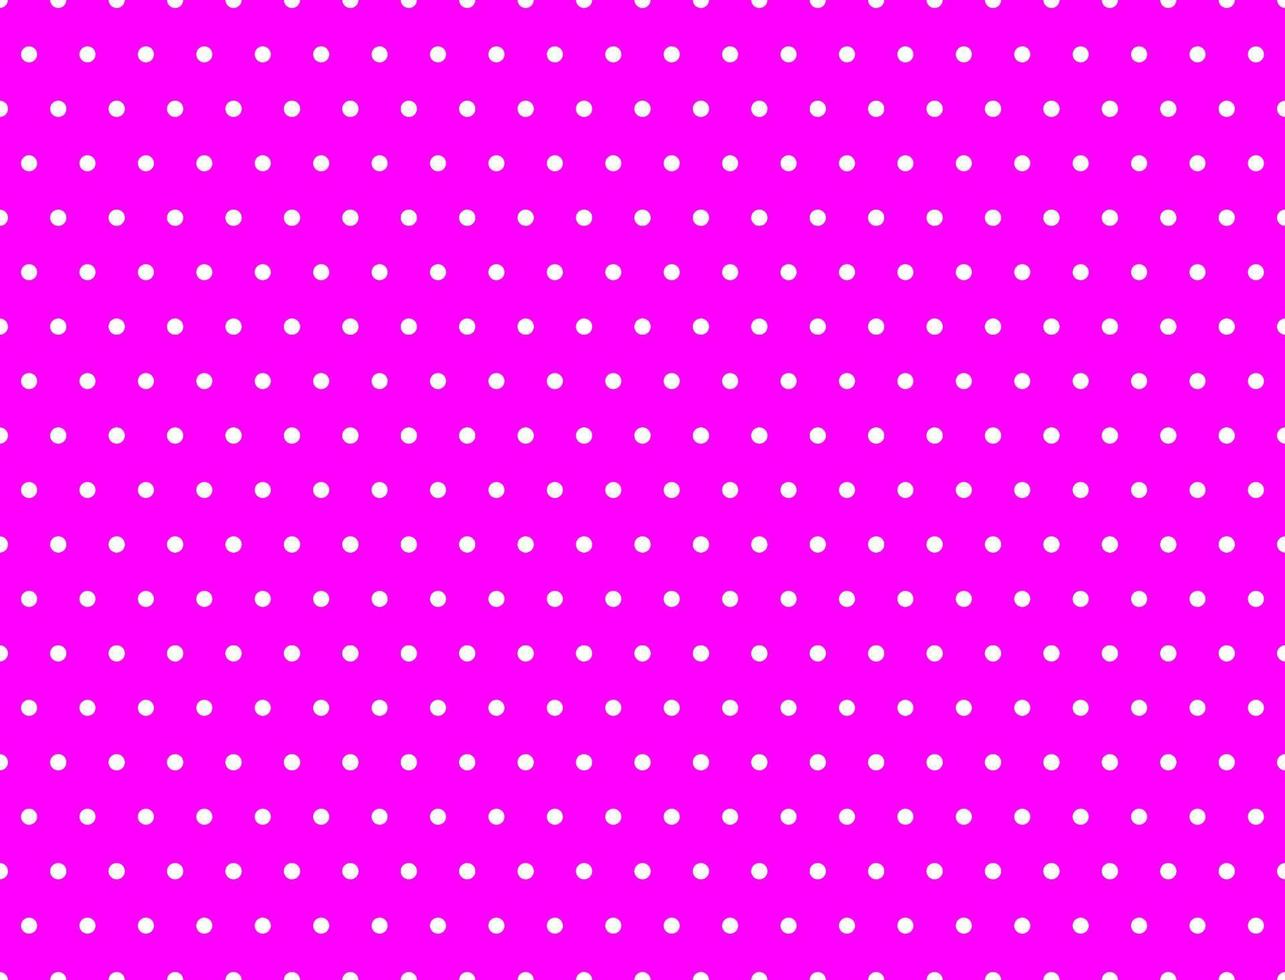 Pink and white polka dot pattern vector